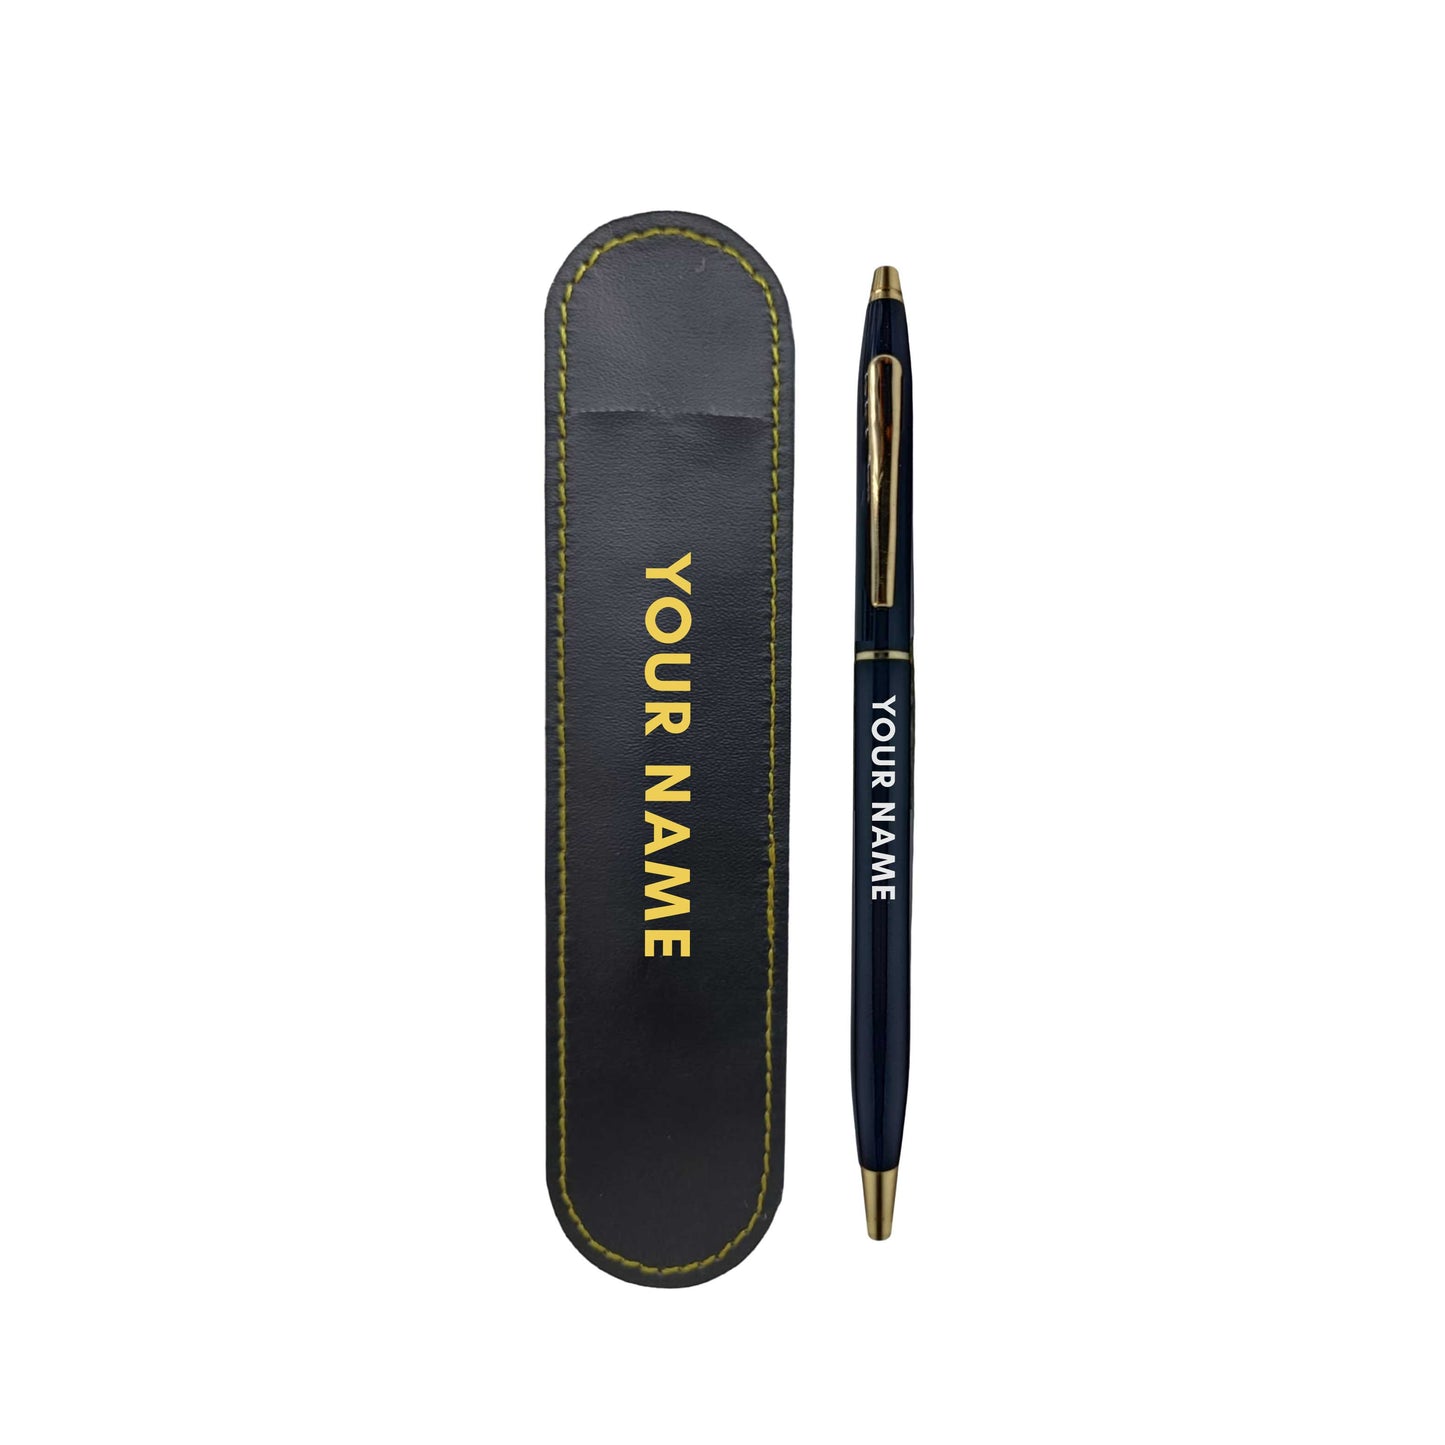 Personalised Pen With Name Engraved Gift Set for for Boss Office Colleagues - Name